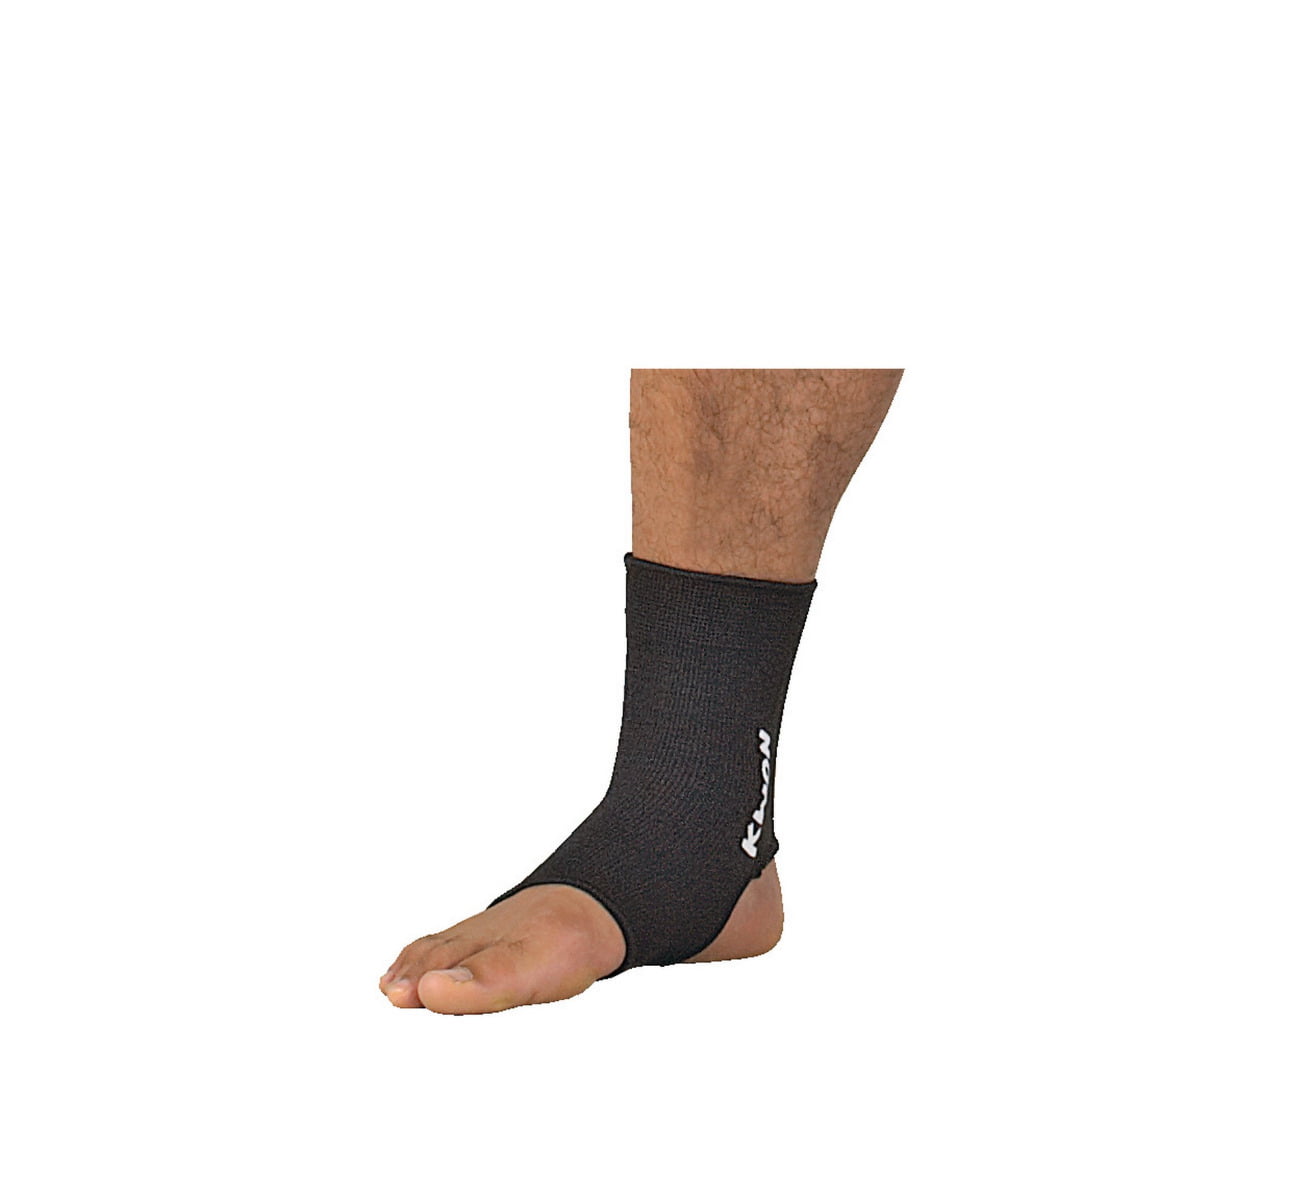 martial ankle guard bandagge3